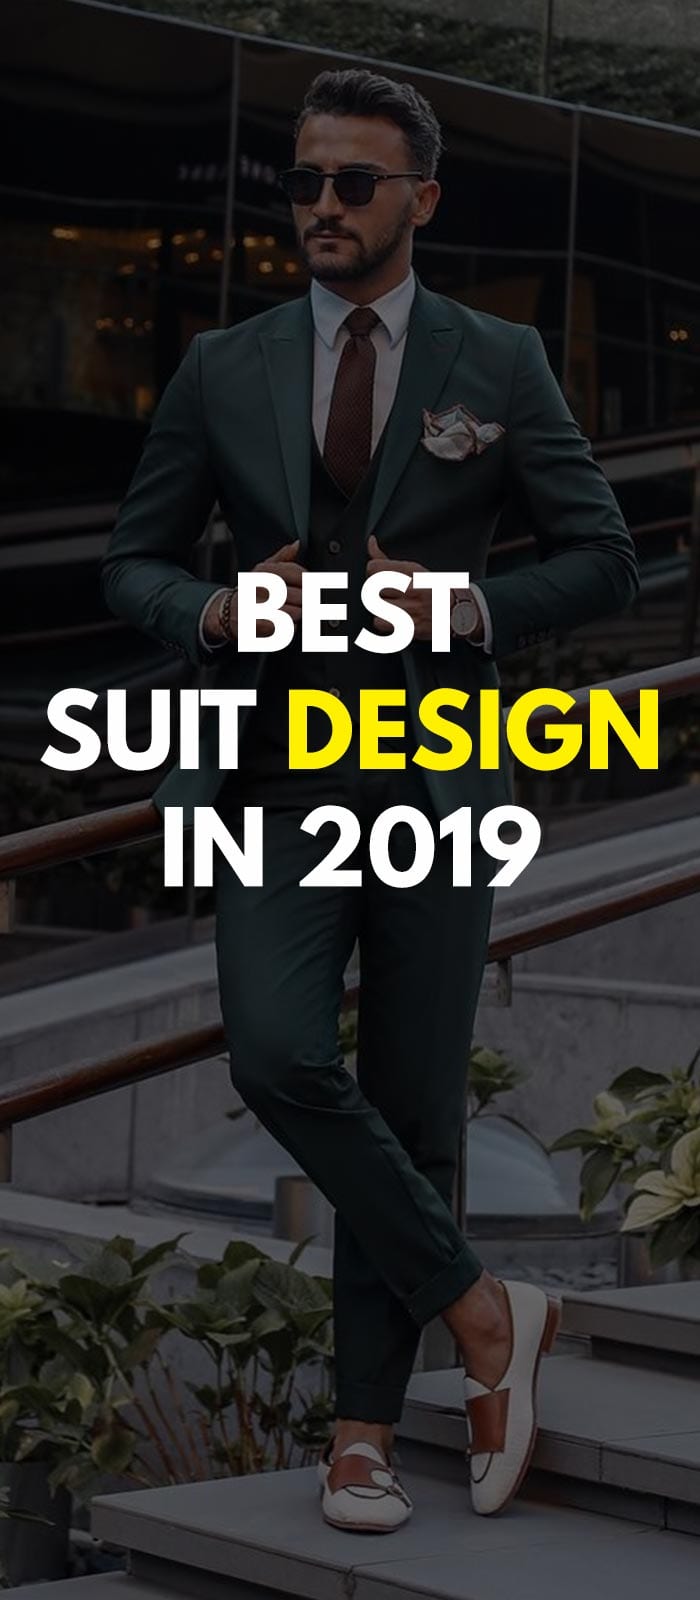 11 Tips To Ace Suit Styling With Ease in 2020